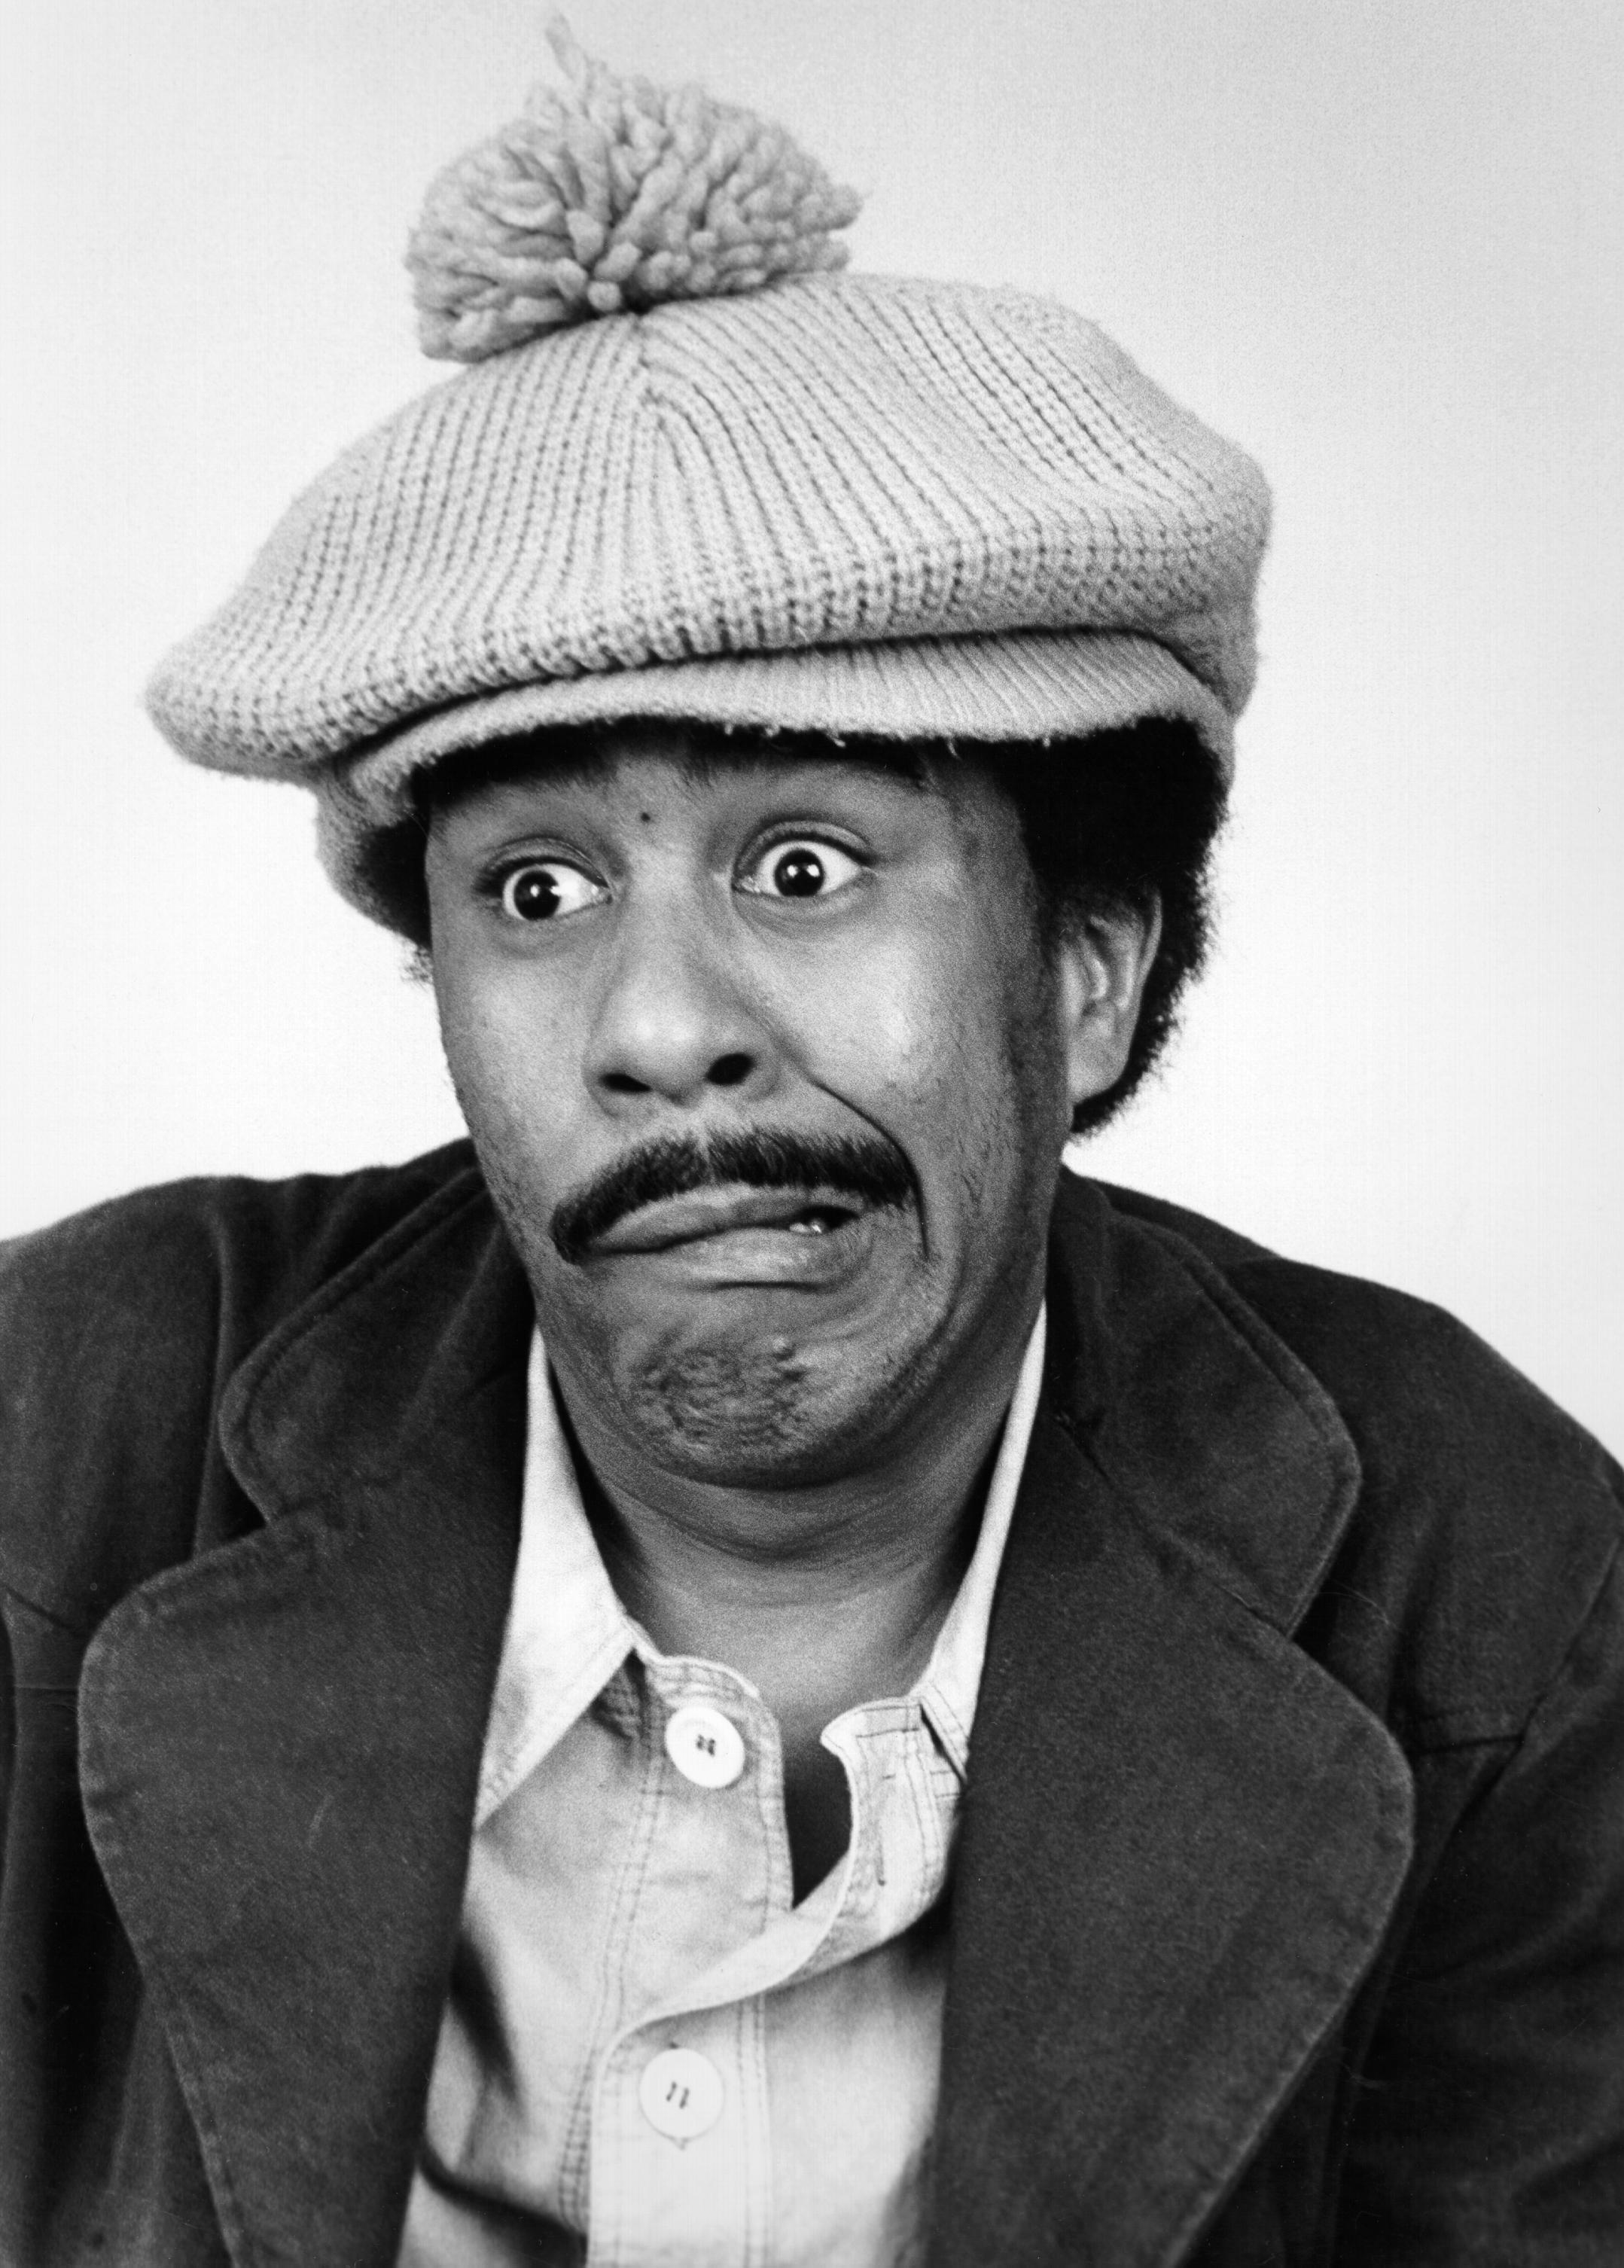 Richard Pryor poses for a portrait session on February 1, 1971, in Los Angeles, California. | Source: Getty Images